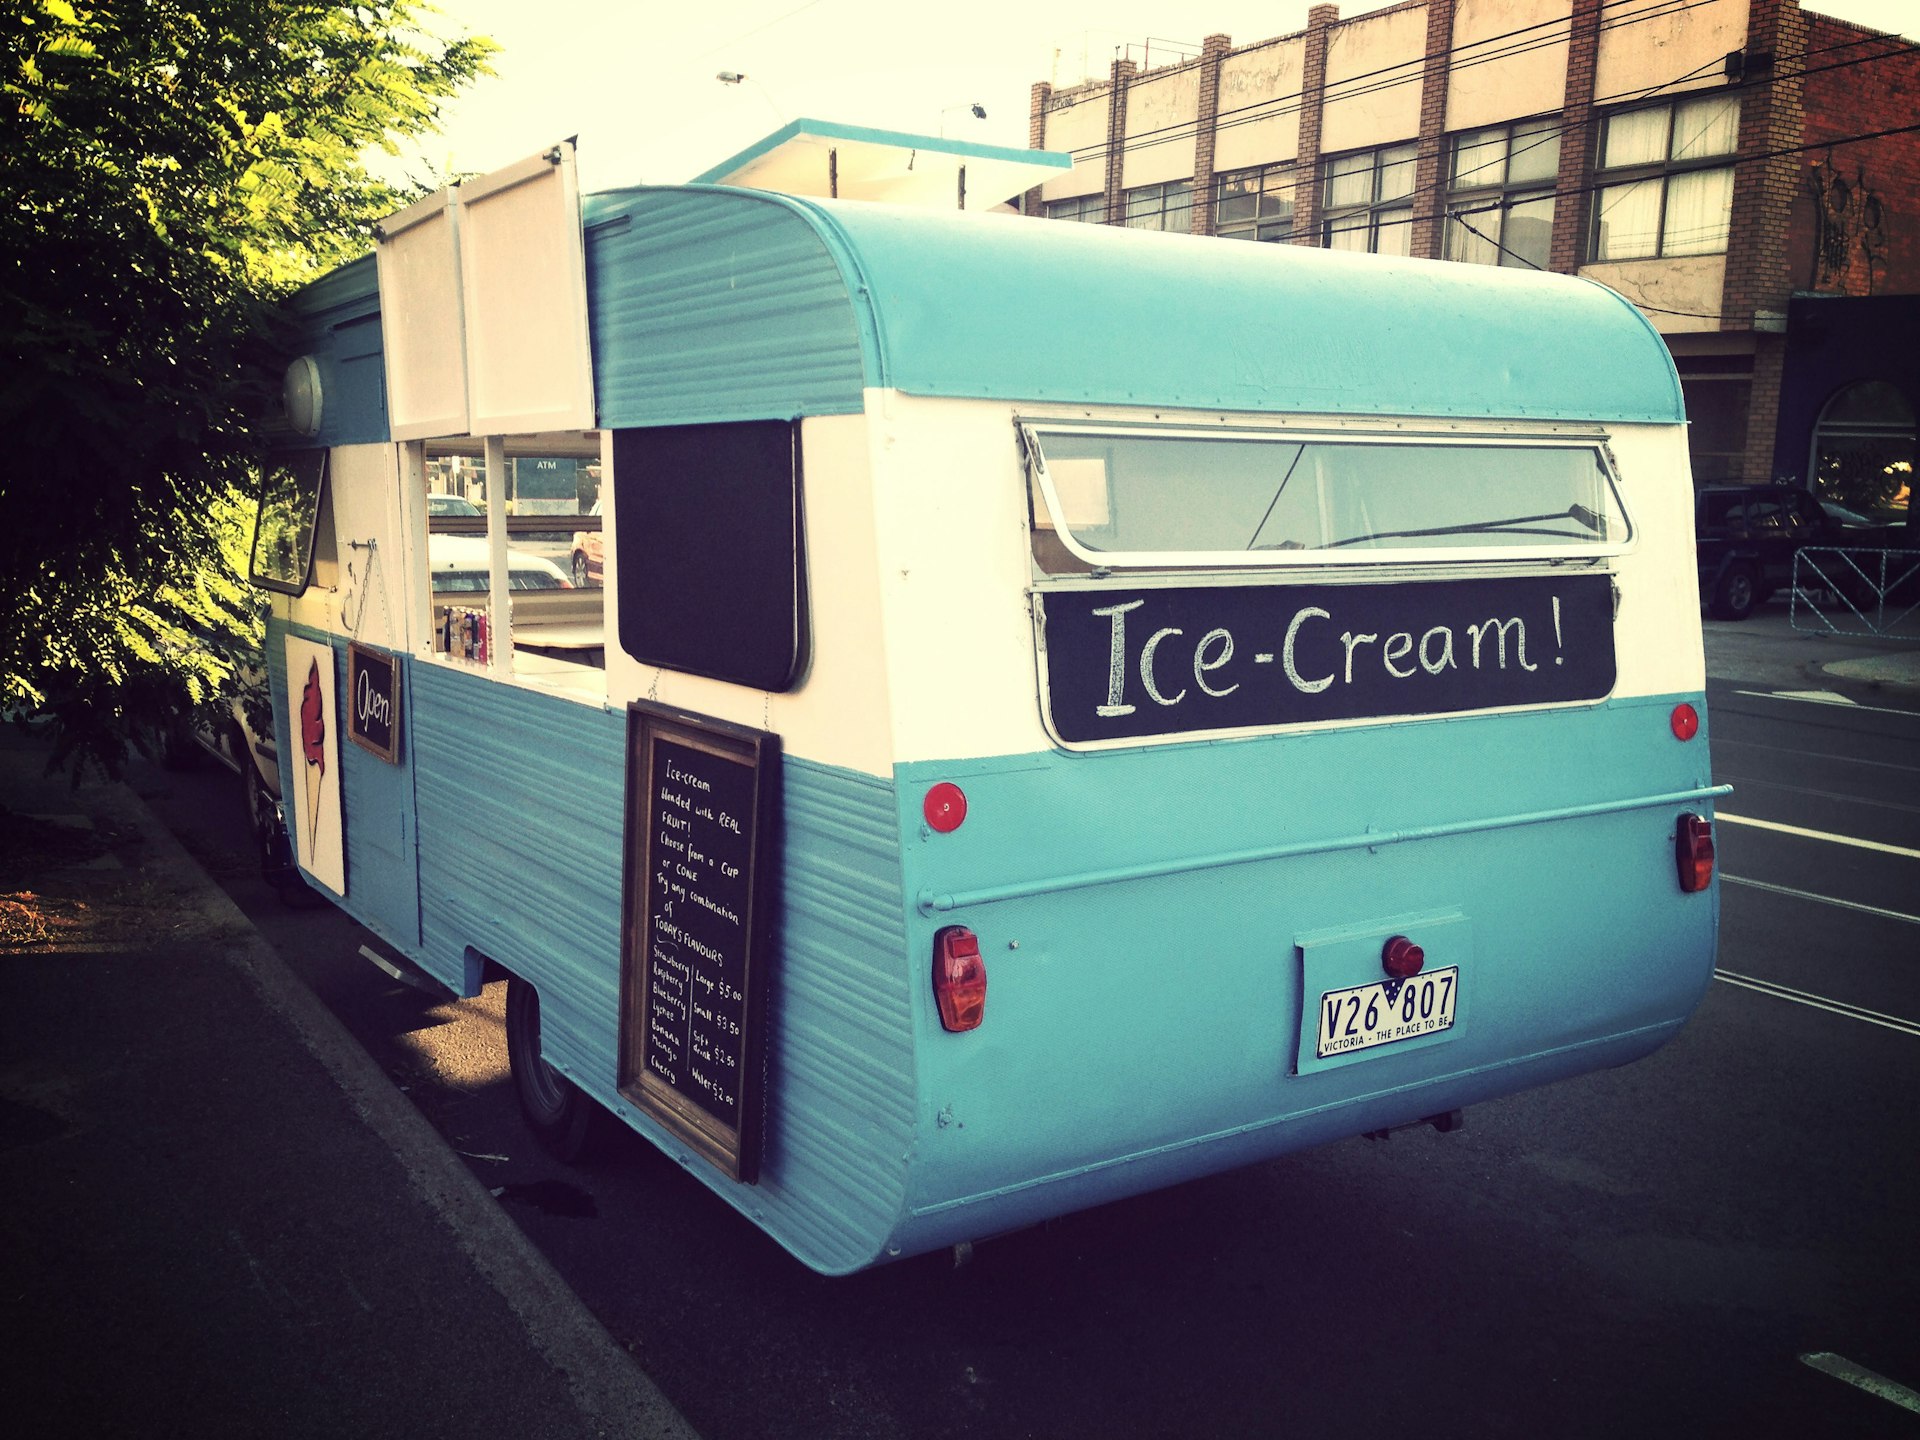 Summer relief from one of Melbourne's ice cream vans. Image by John Carney / Flickr